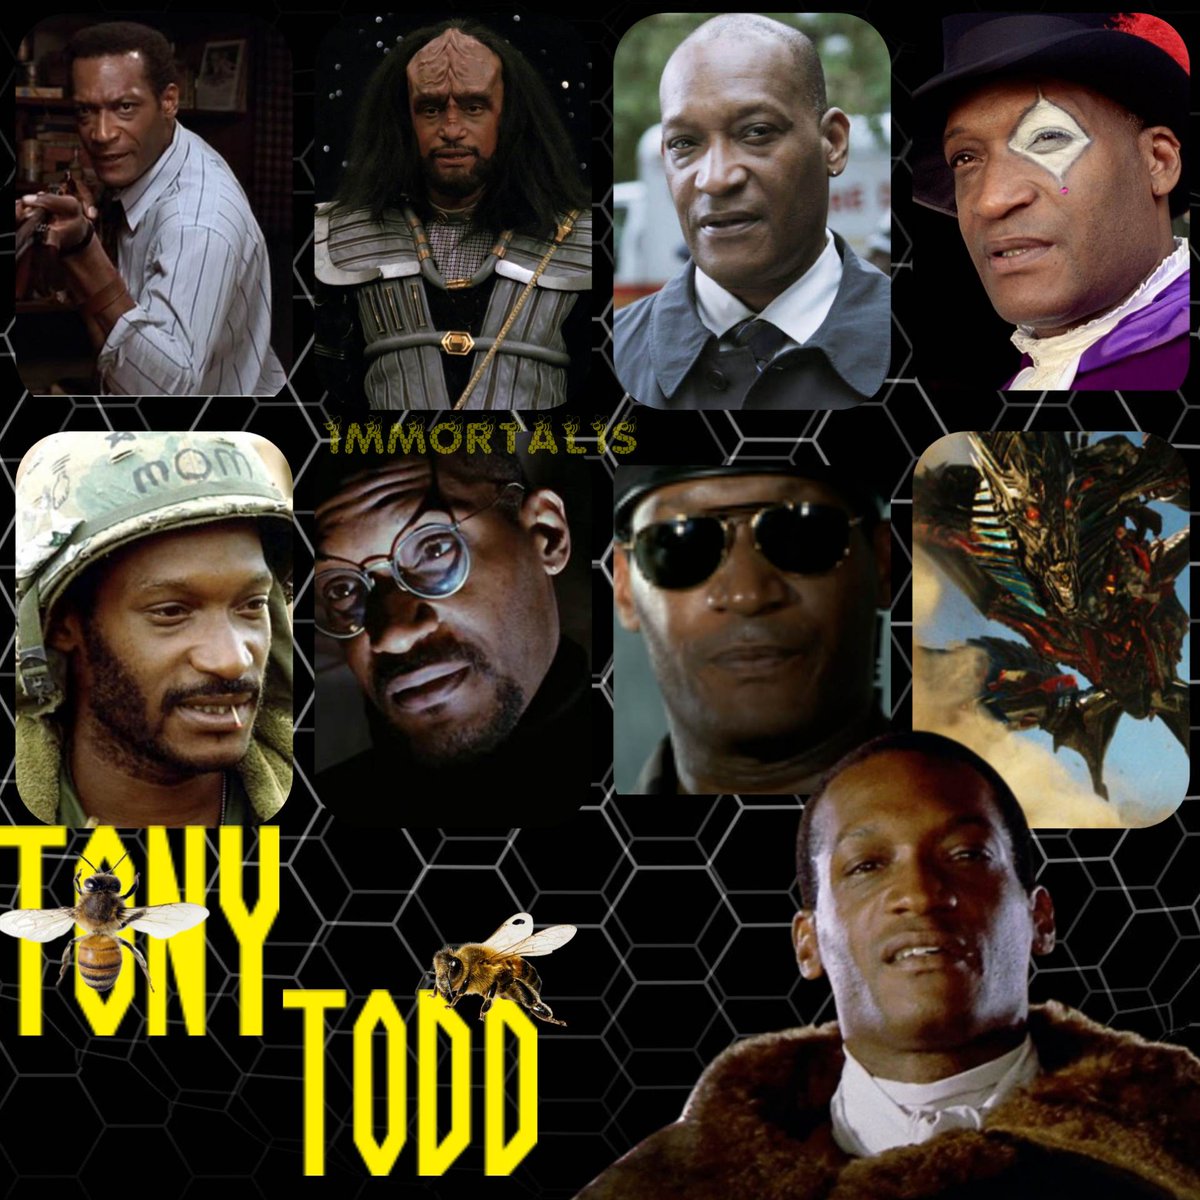 Tony Todd. What comes to mind? #Horrorfam #Scifi